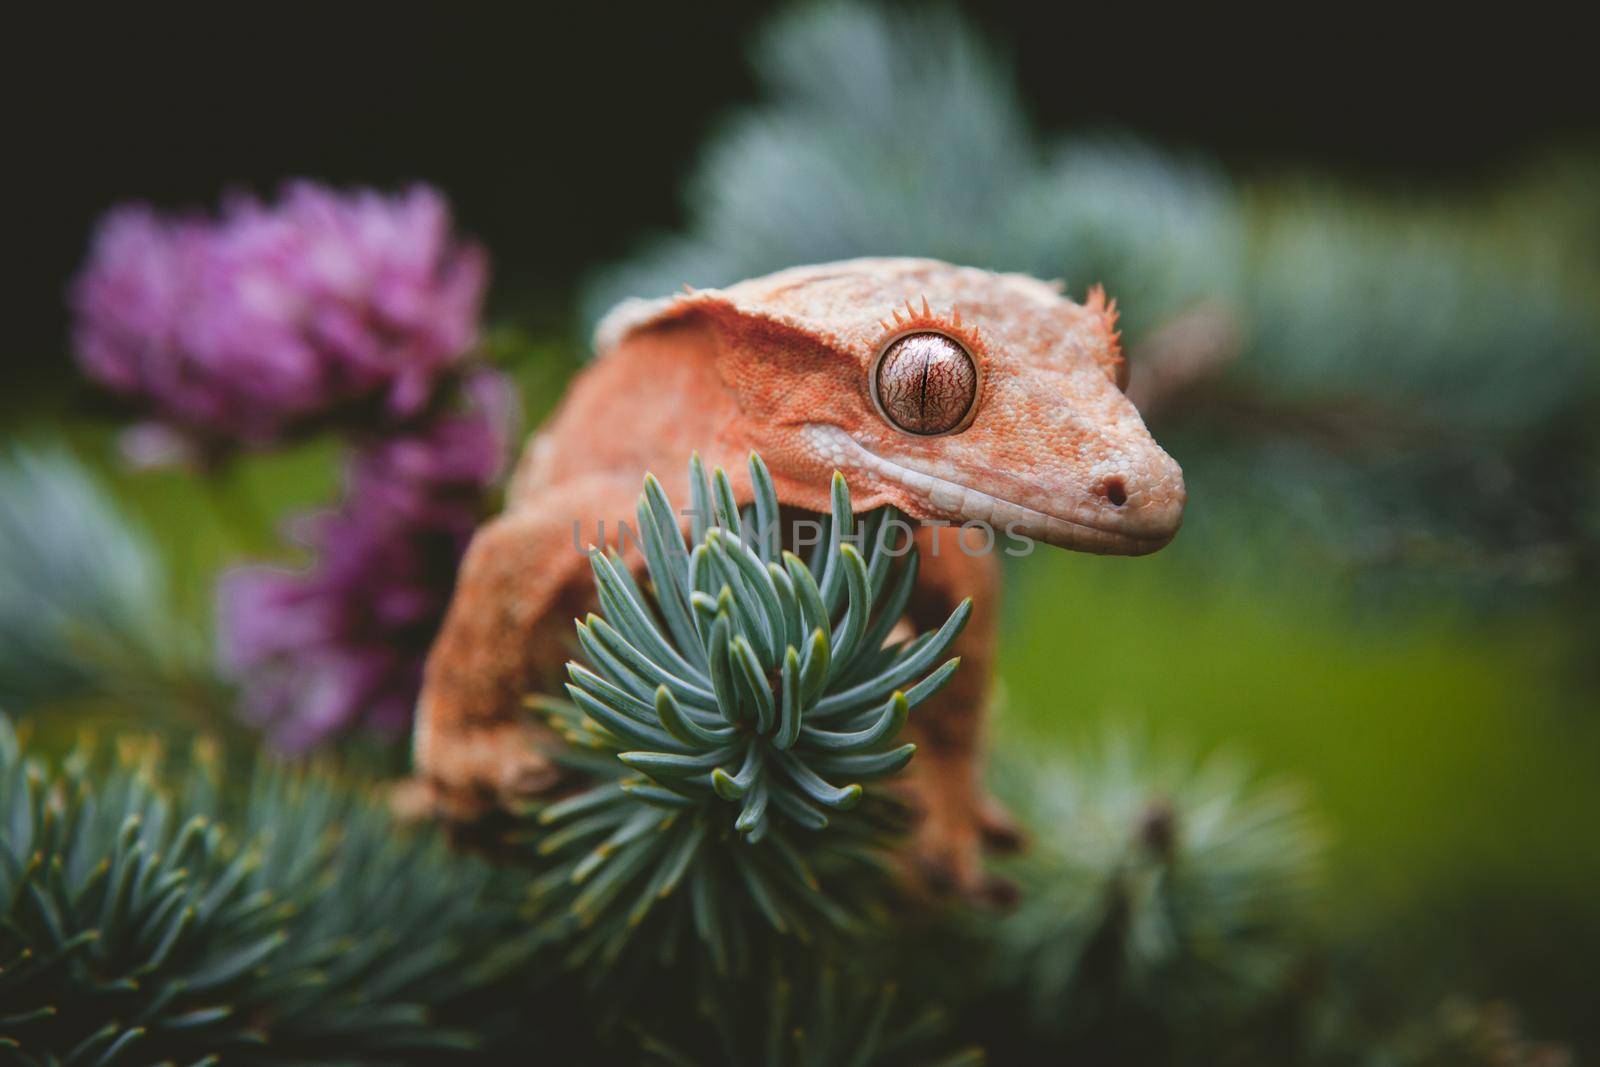 New Caledonian crested gecko, Rhacodactylus ciliatus, on tree with flowers